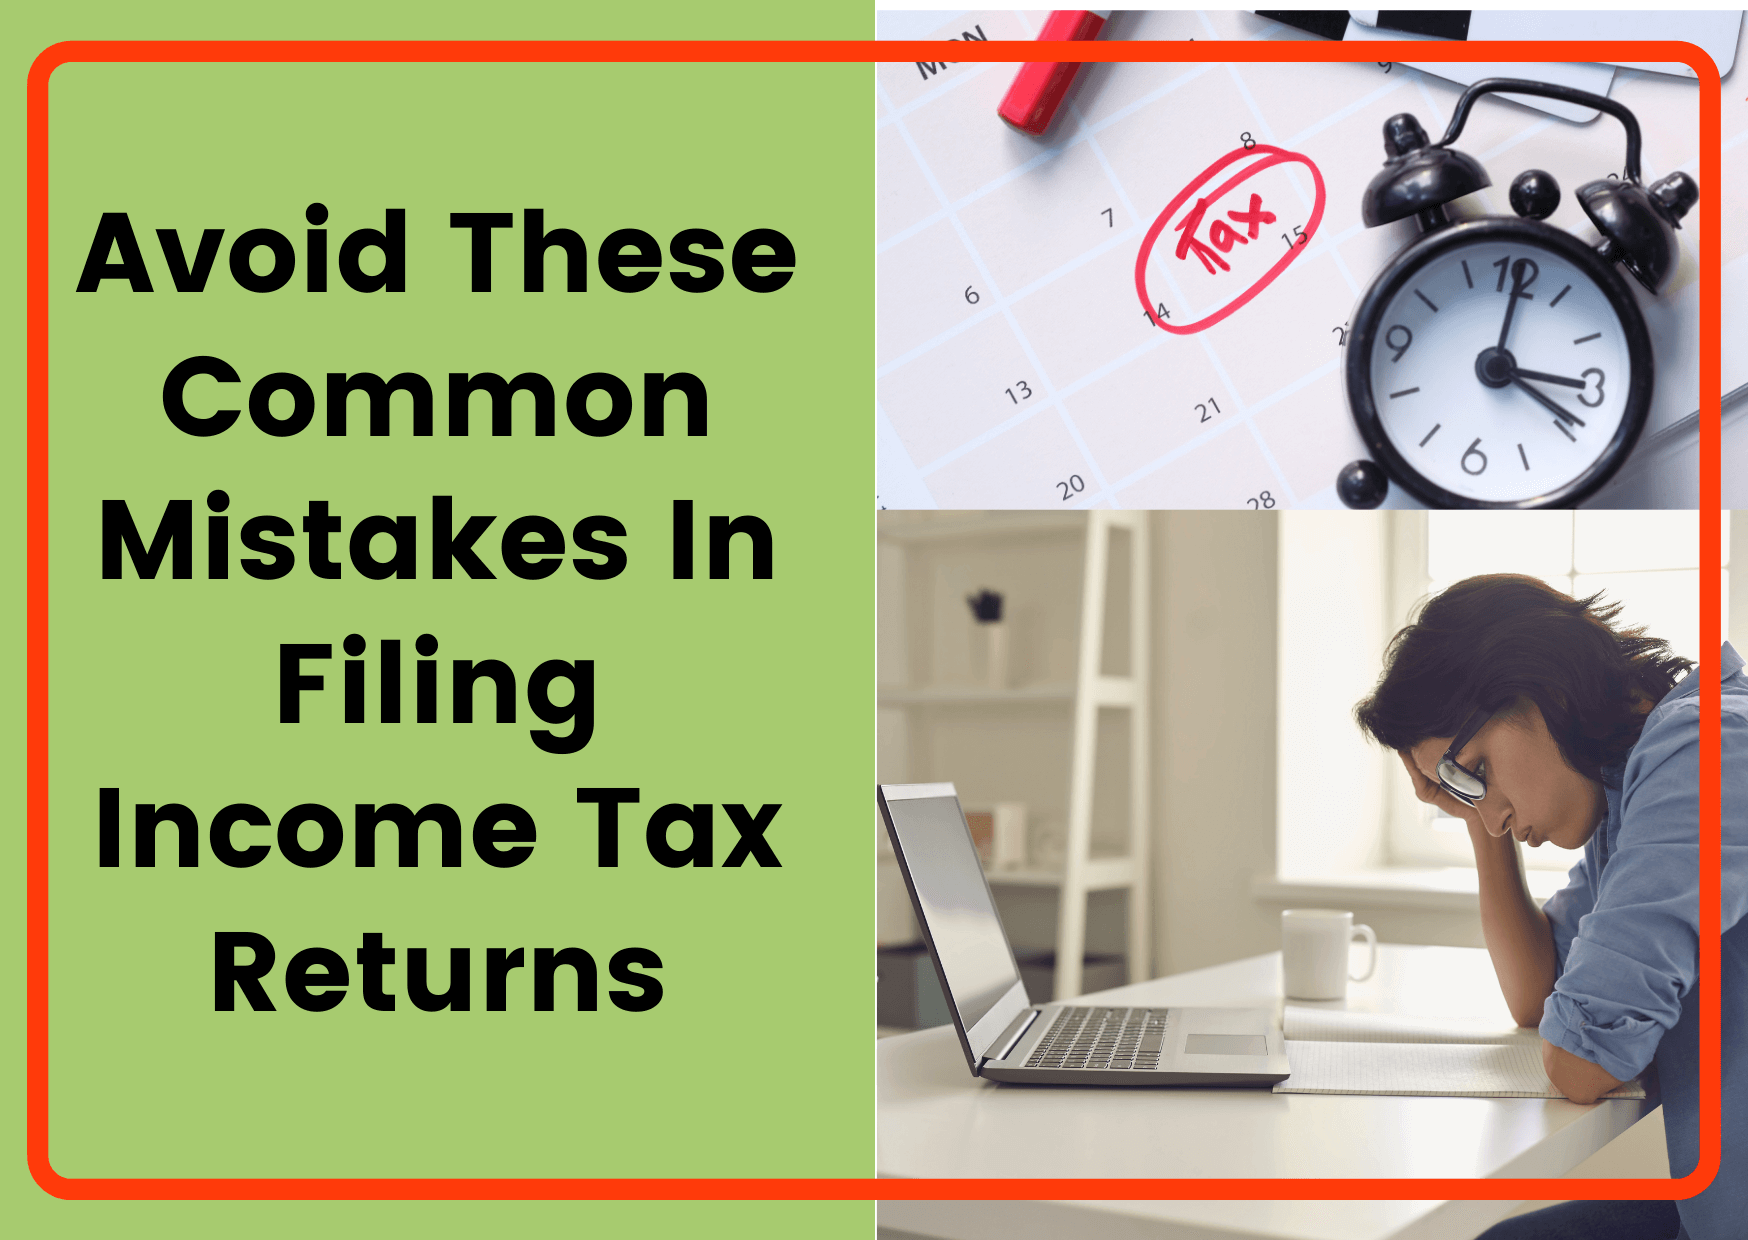 Avoid These Common Mistakes In Filing Tax Returns